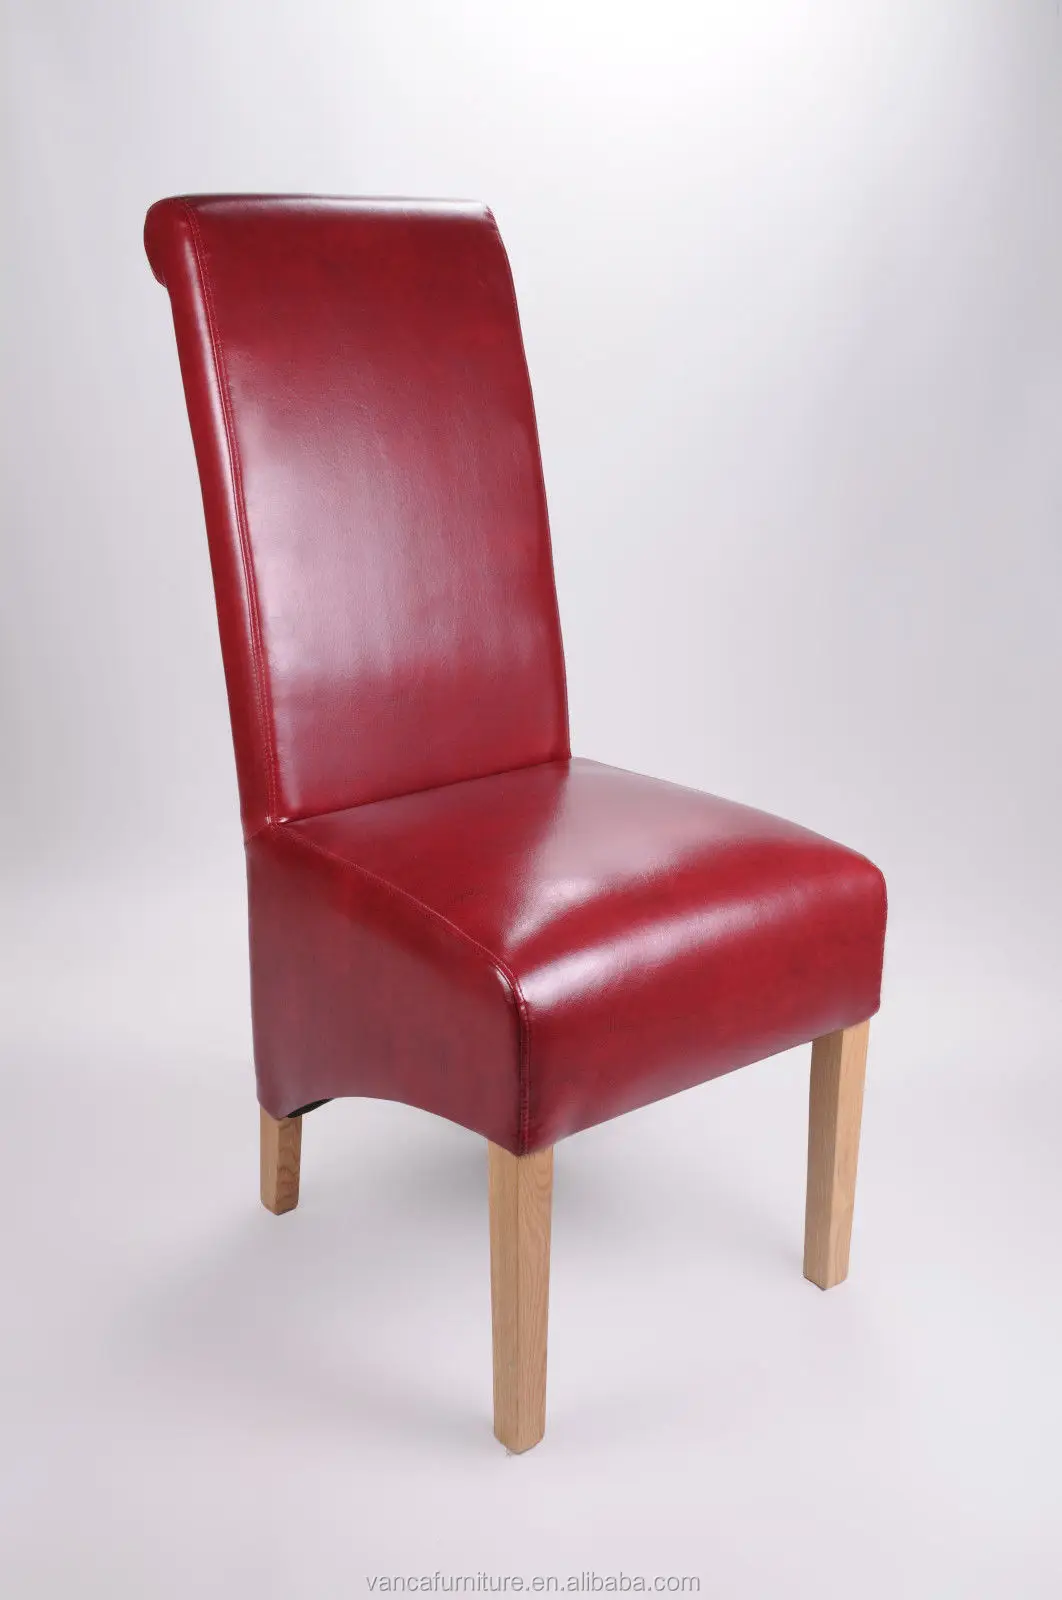 Dining Room Chair Hotel Luxury Dining Chair - Buy Dining Room Chair